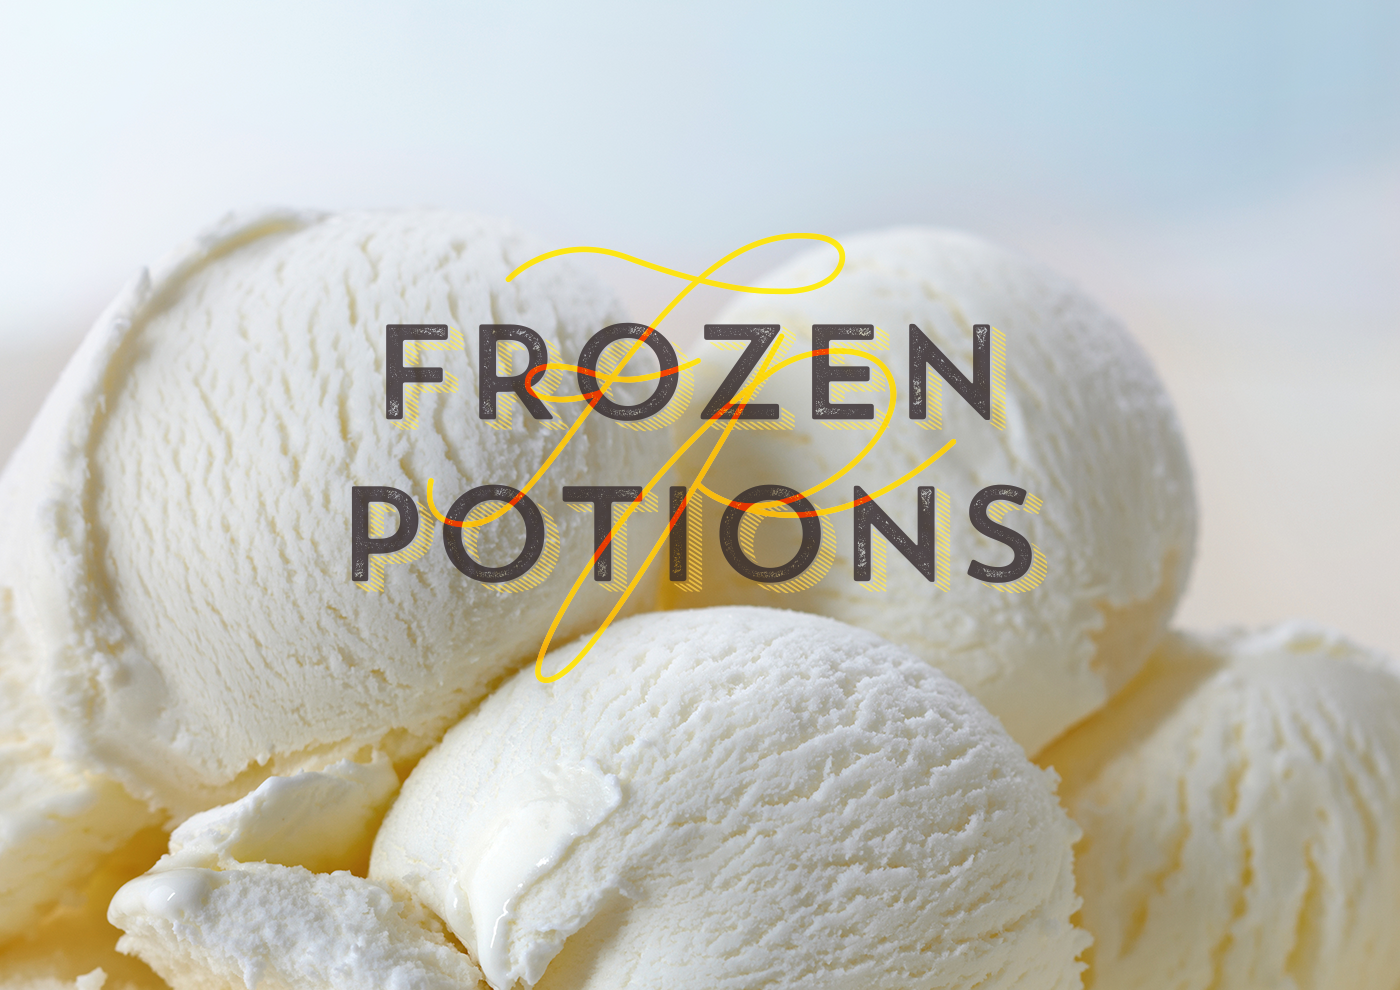 ice cream ice Potions cream flavors frost frozen desserts Frozen Creations hand crafted 100% natural Events Ice Cream Cookies visual identity logo social